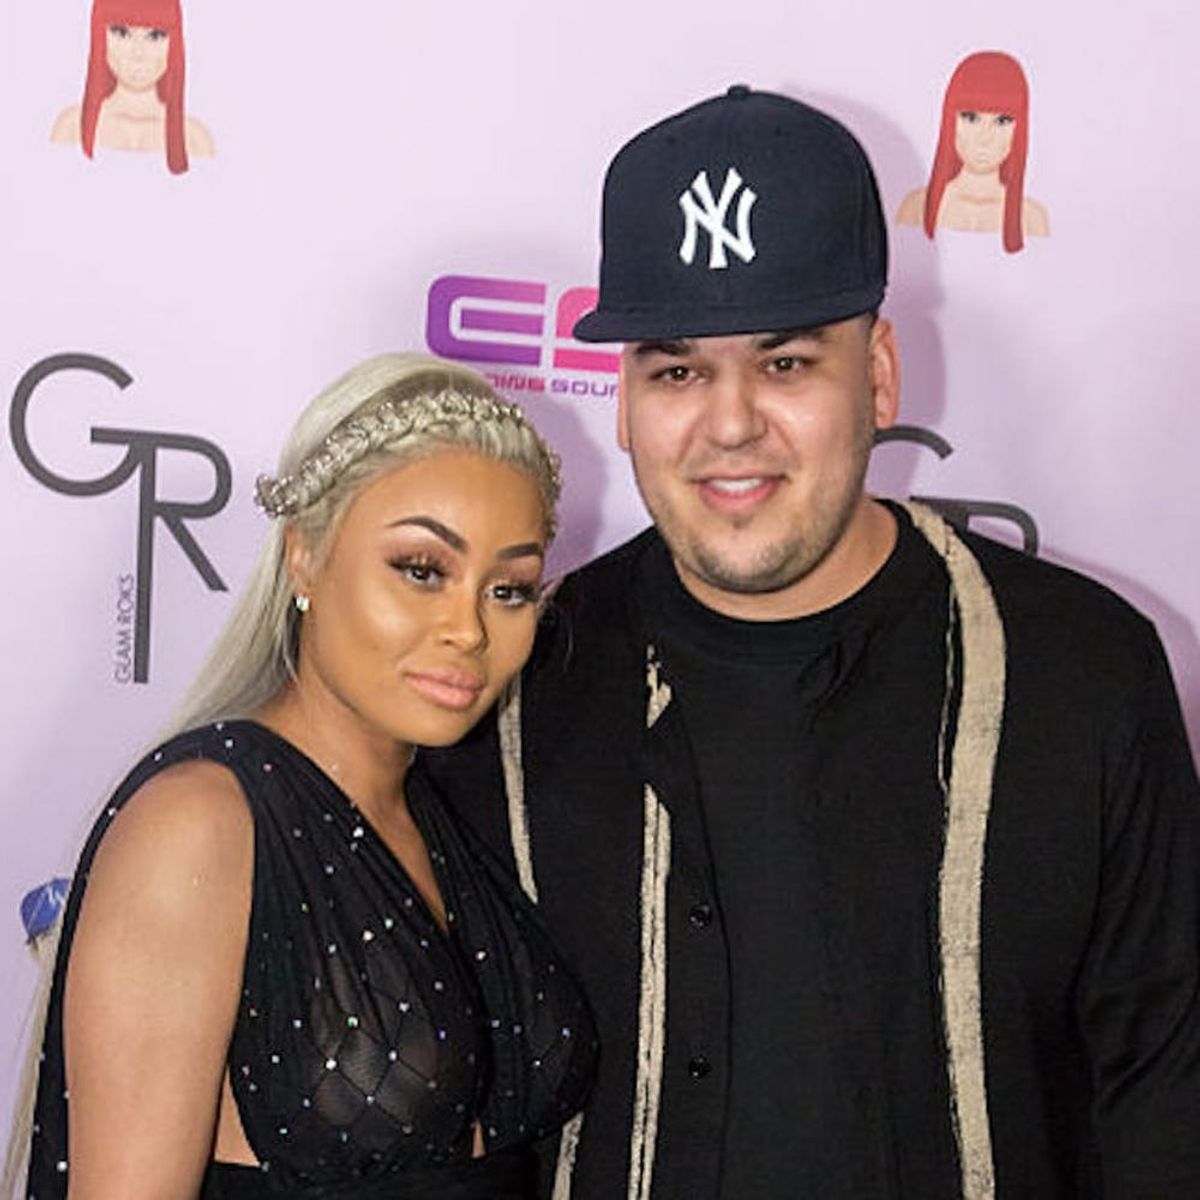 Morning Buzz! Rob Kardashian Has a New Reality Star Girlfriend Just Days After a Loving Tribute to Blac Chyna + More